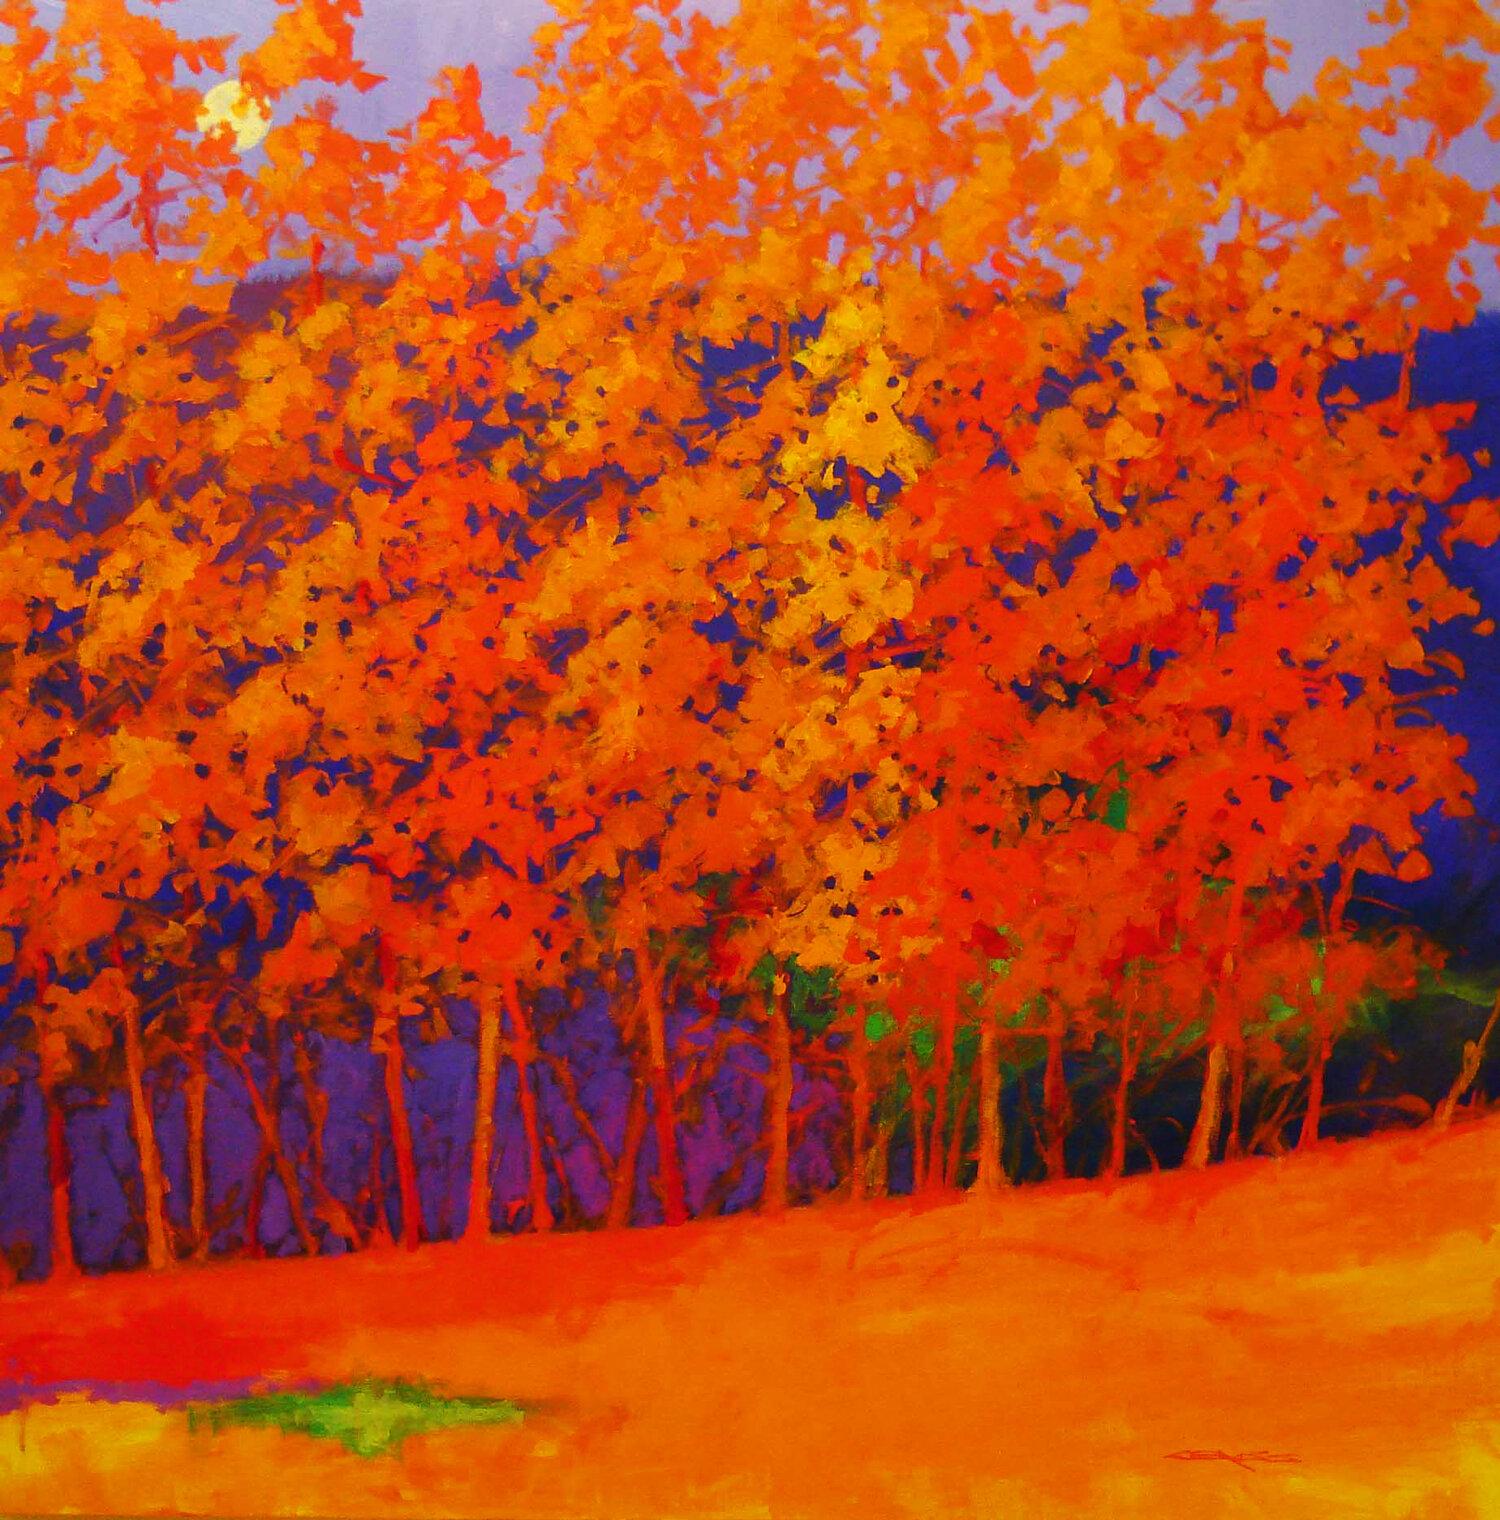 Charles Emery Ross Landscape Painting - C.E. Ross, "Vibrant Day", Colorful Orange Purple Abstract Forest Landscape